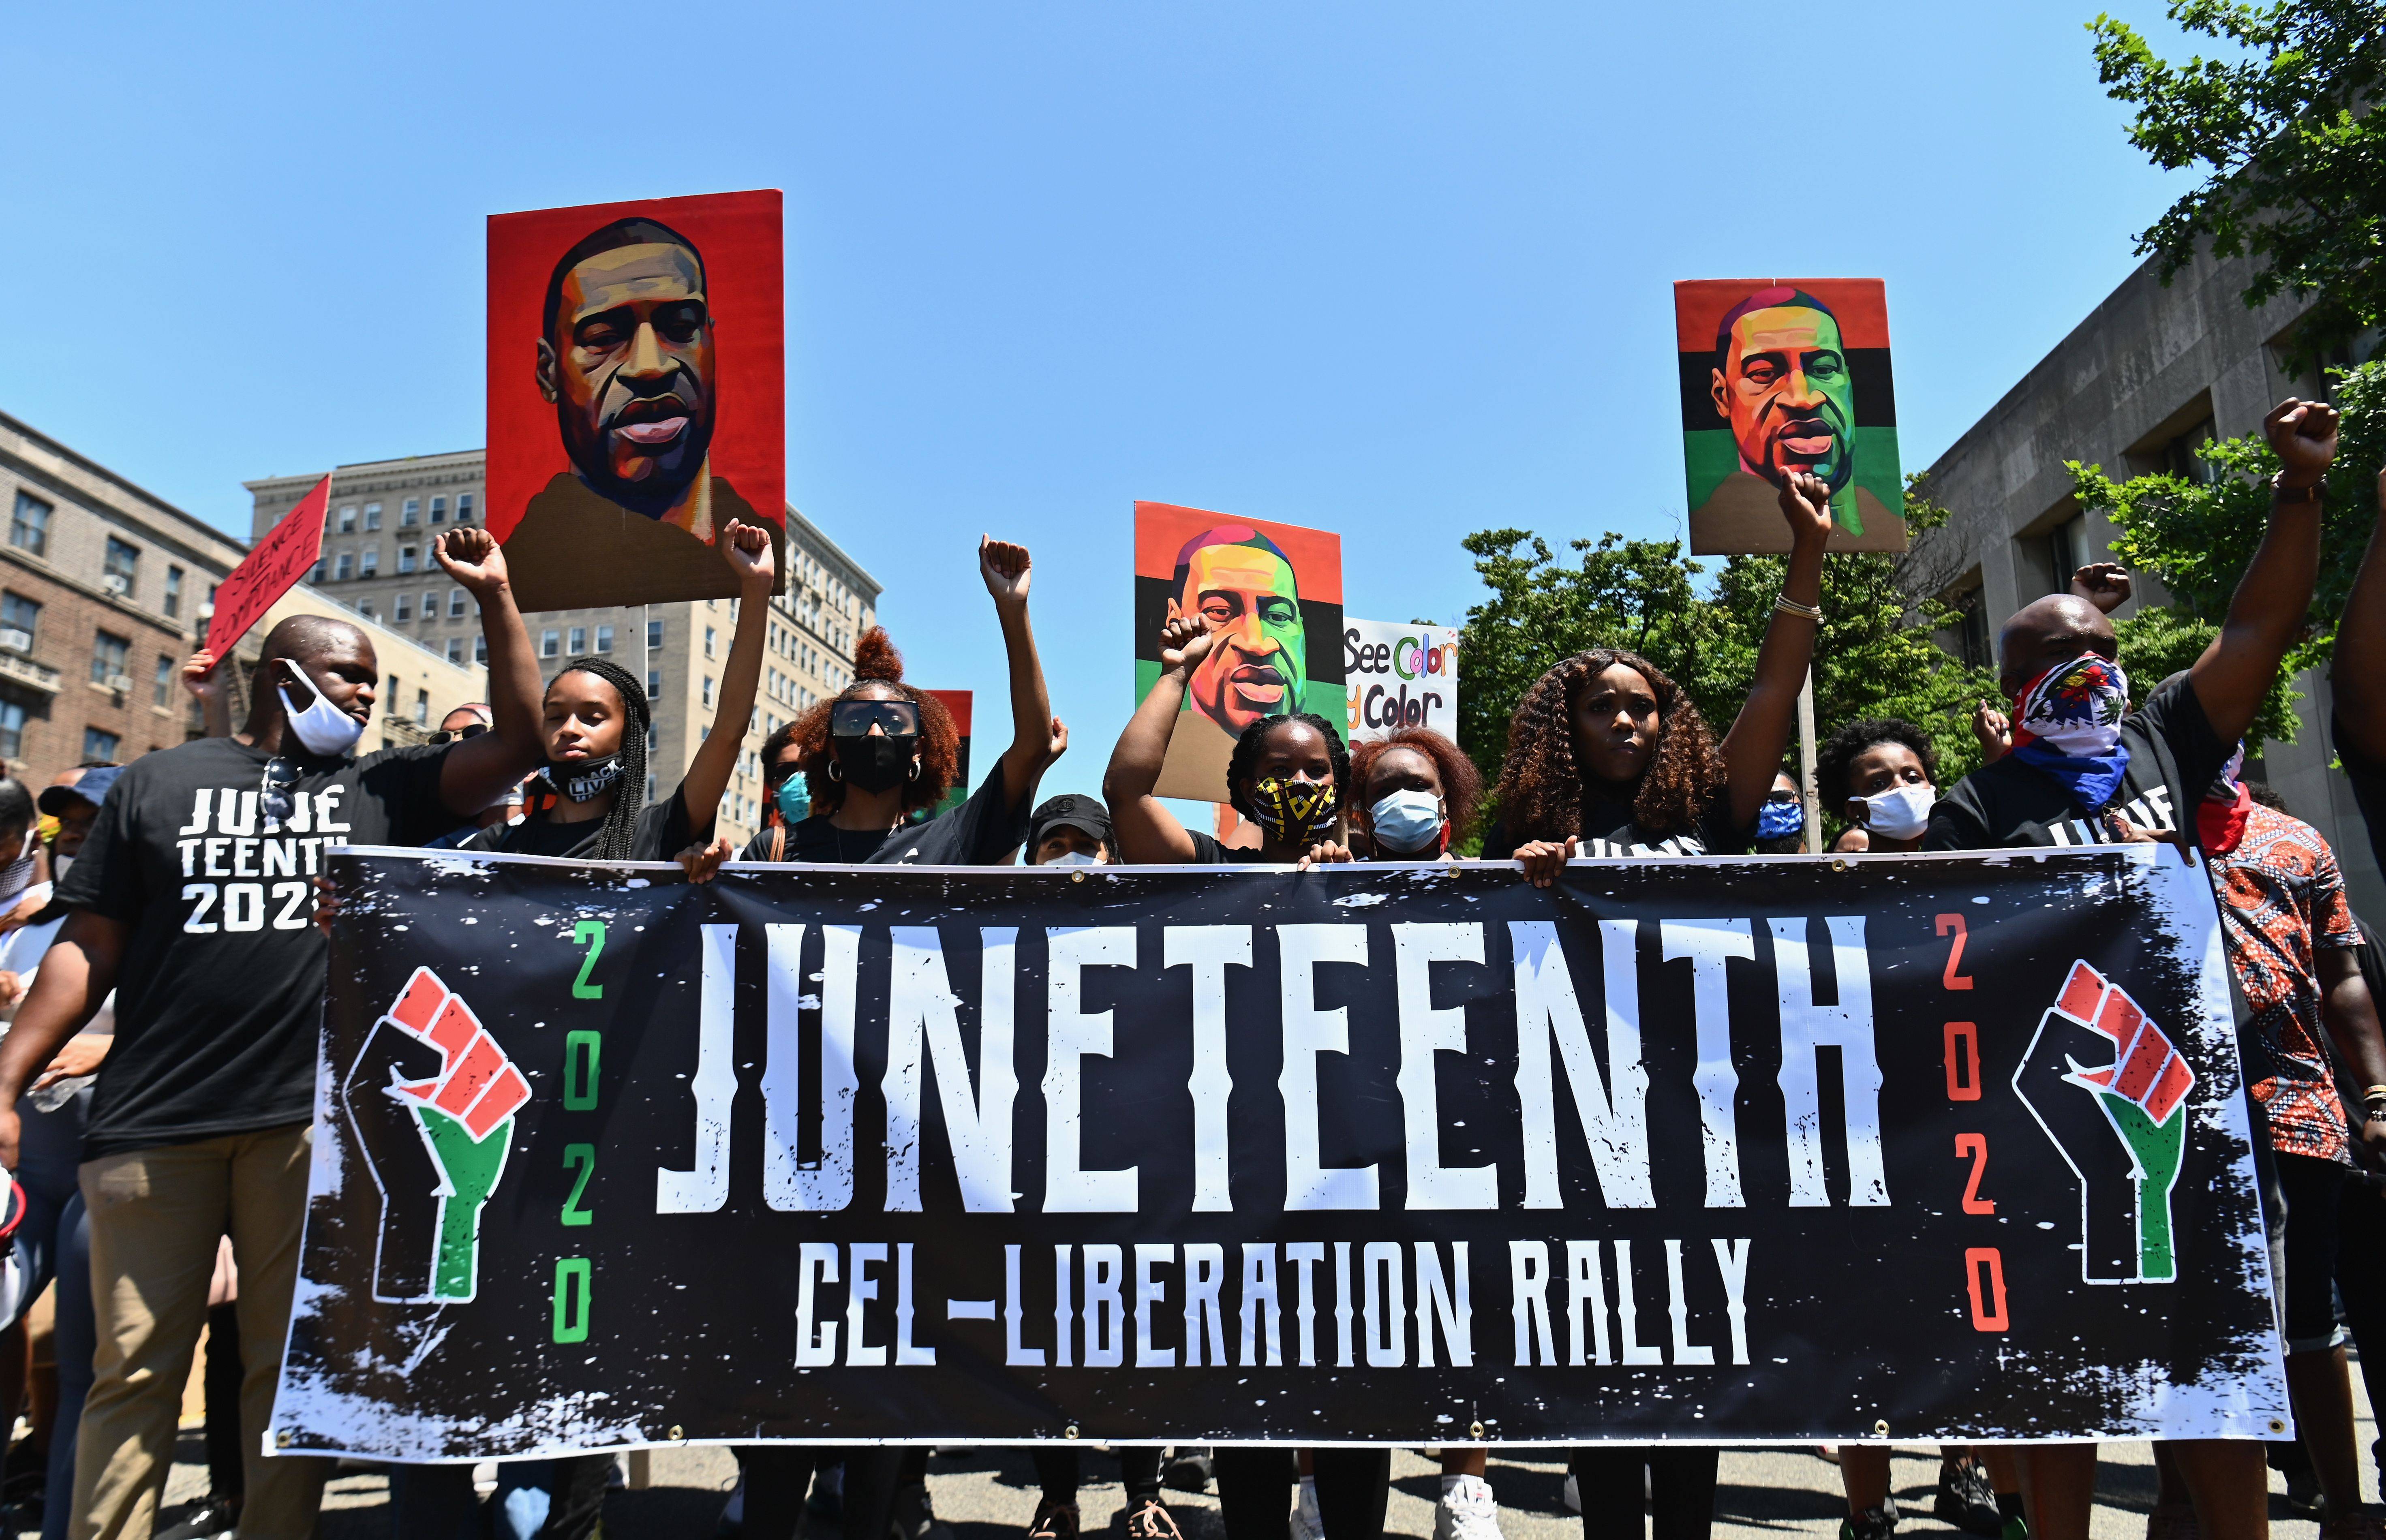 Protestors hold pictures of George Floyd as they march during a Juneteenth rally at Grand Army Plaza on June 19, 2020 in the Brooklyn Borough of New York City. - The US marks the end of slavery by celebrating Juneteenth, with the annual unofficial holiday taking on renewed significance as millions of Americans confront the nation's living legacy of racial injustice. (Photo by Angela Weiss / AFP) (Photo by ANGELA WEISS/AFP via Getty Images)